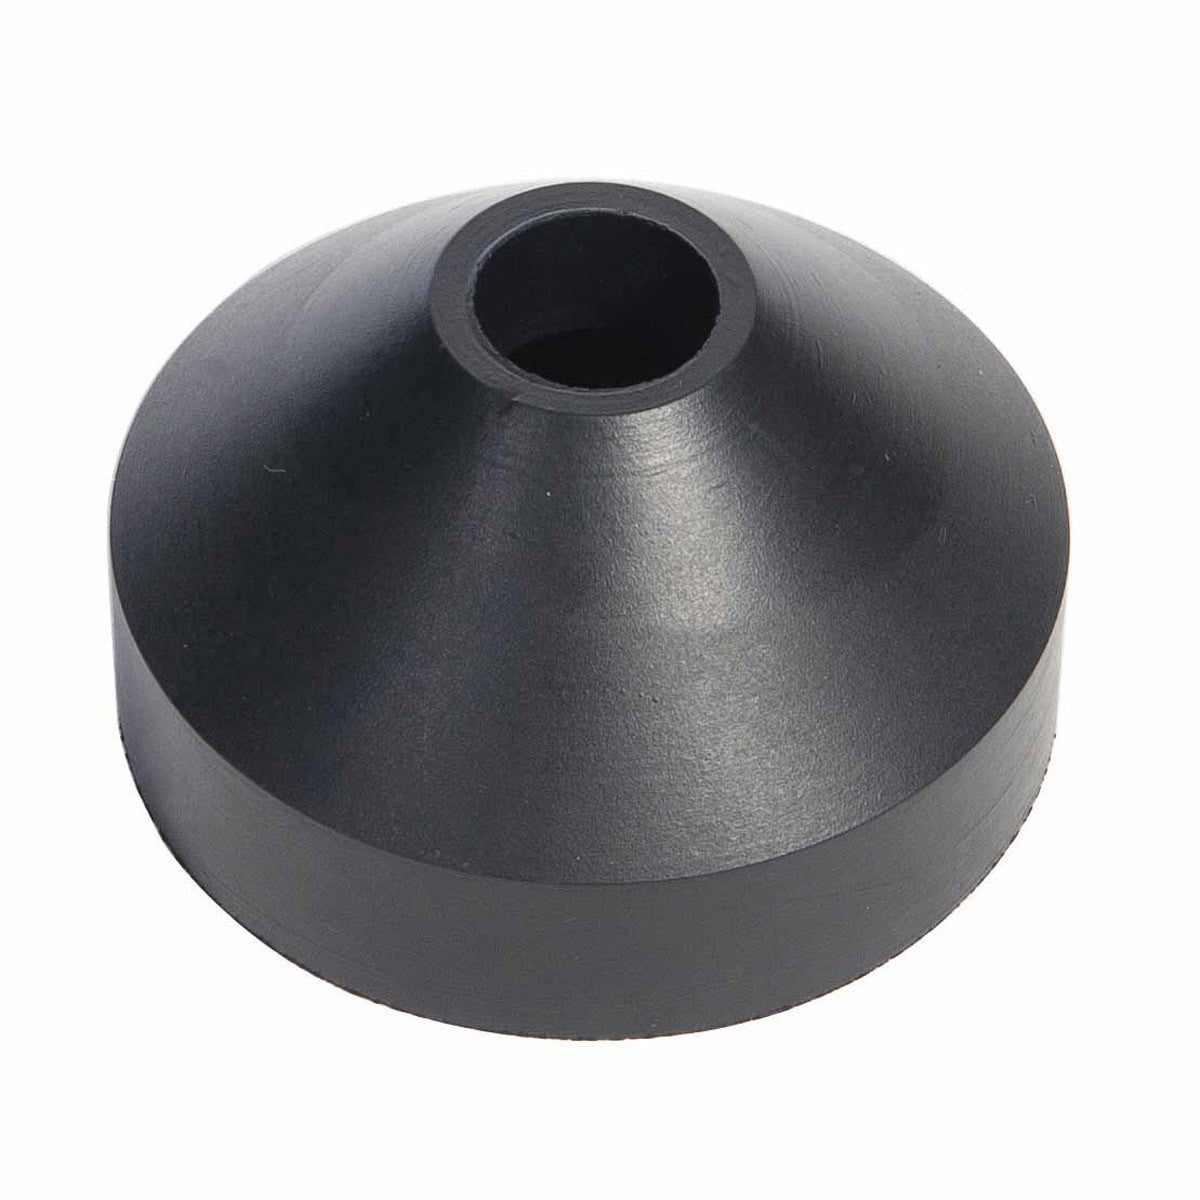 Greenlee 25644 Adapter Cone 1-1/4" to 2-1/2" Conduit